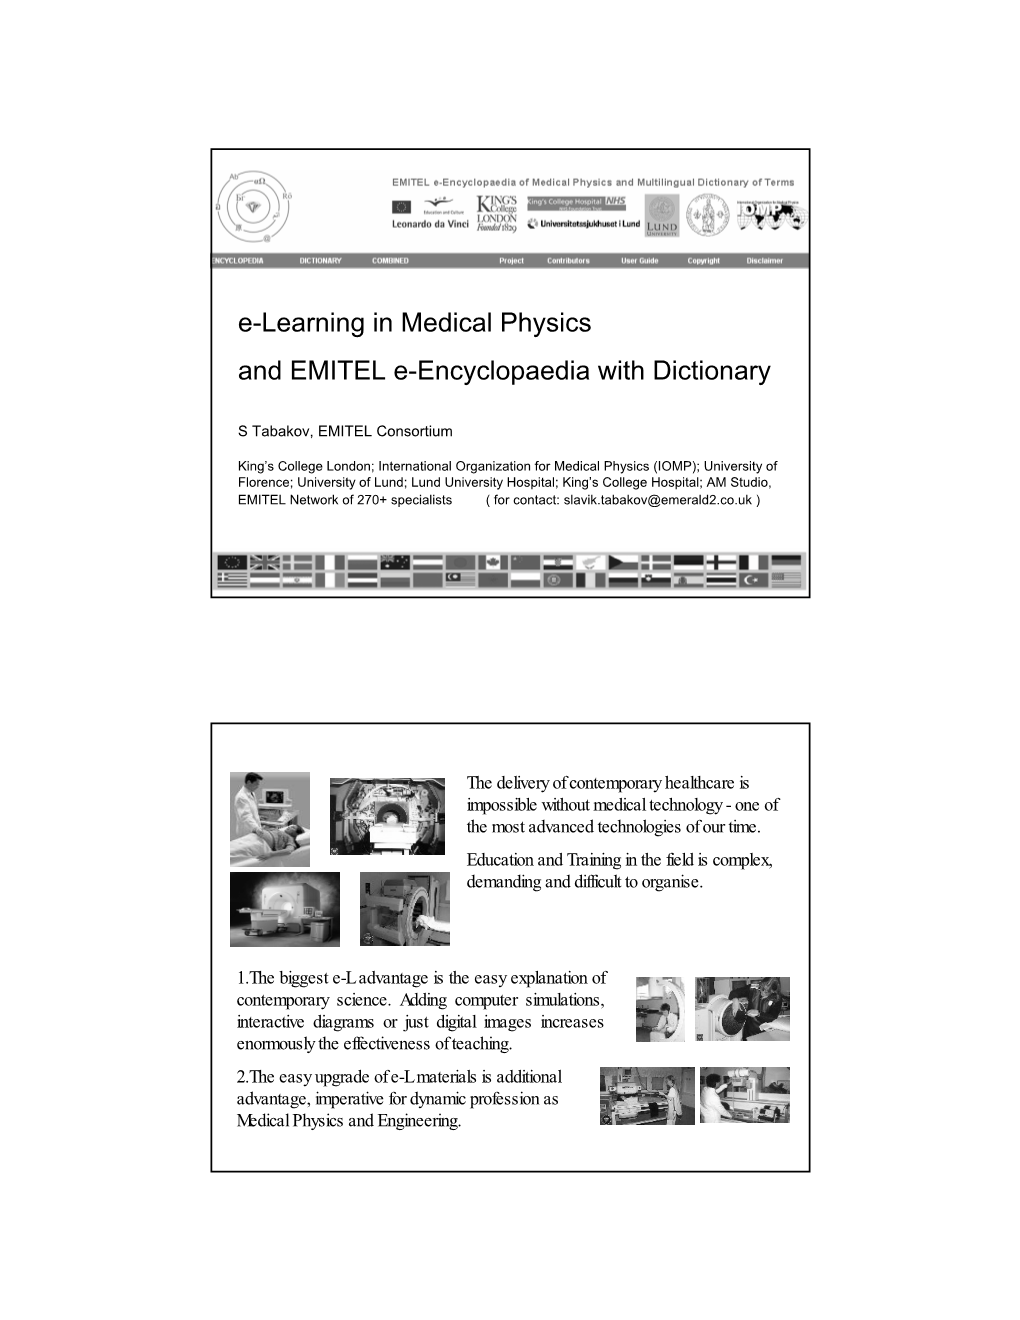 E-Learning in Medical Physics and EMITEL E-Encyclopaedia with Dictionary